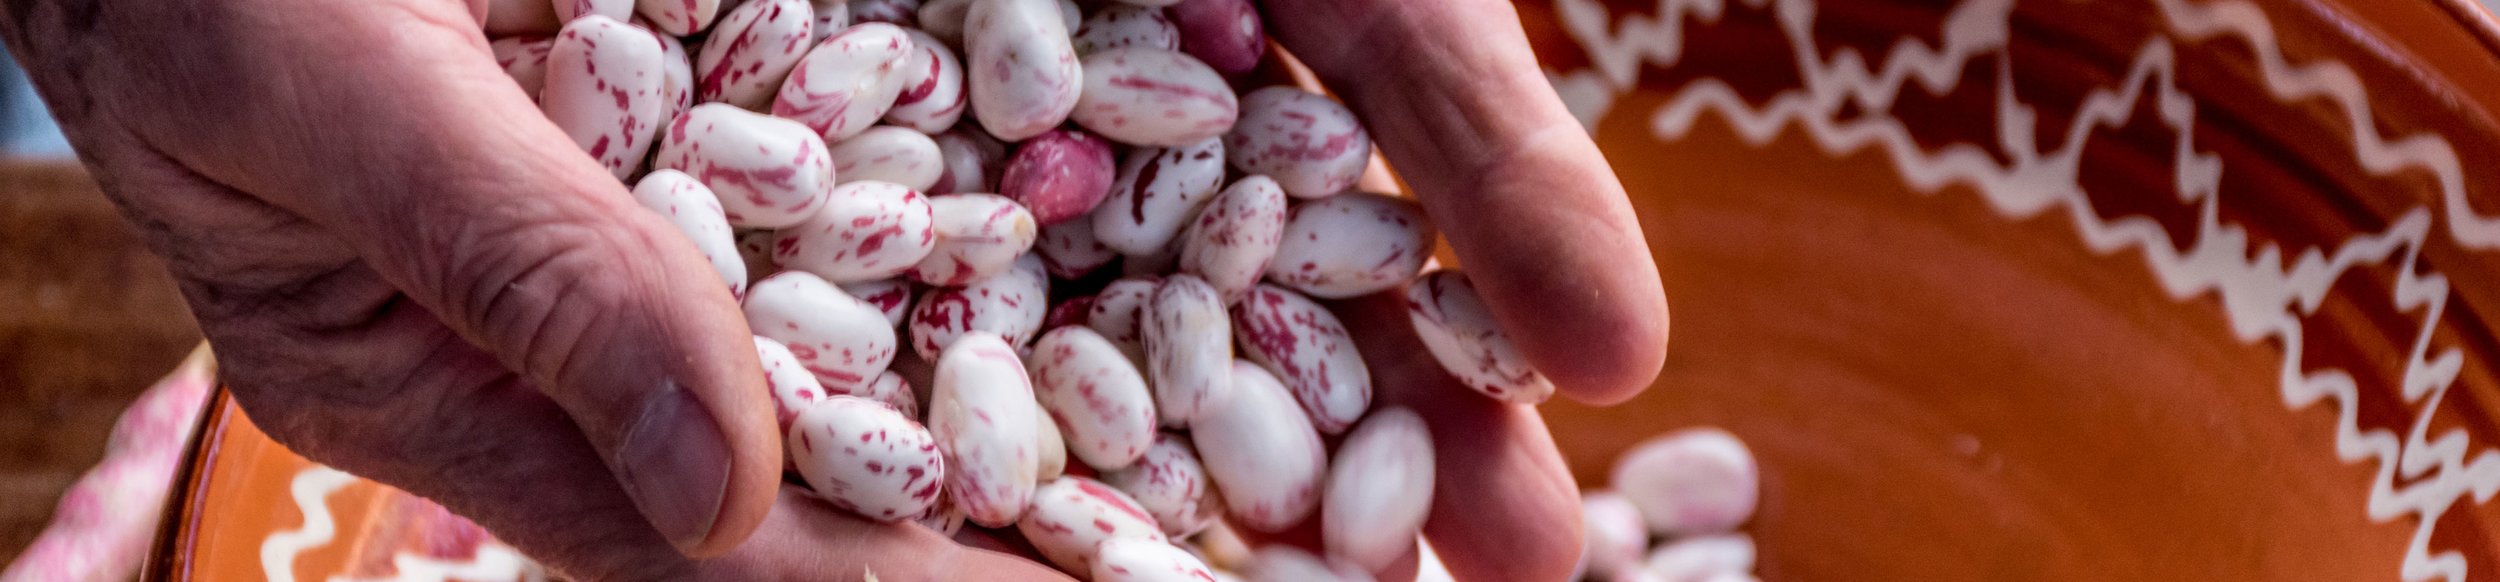 Originally from Columbia in South America, cranberry beans have become especially popular in Italy, where they are often called borlotti beans.